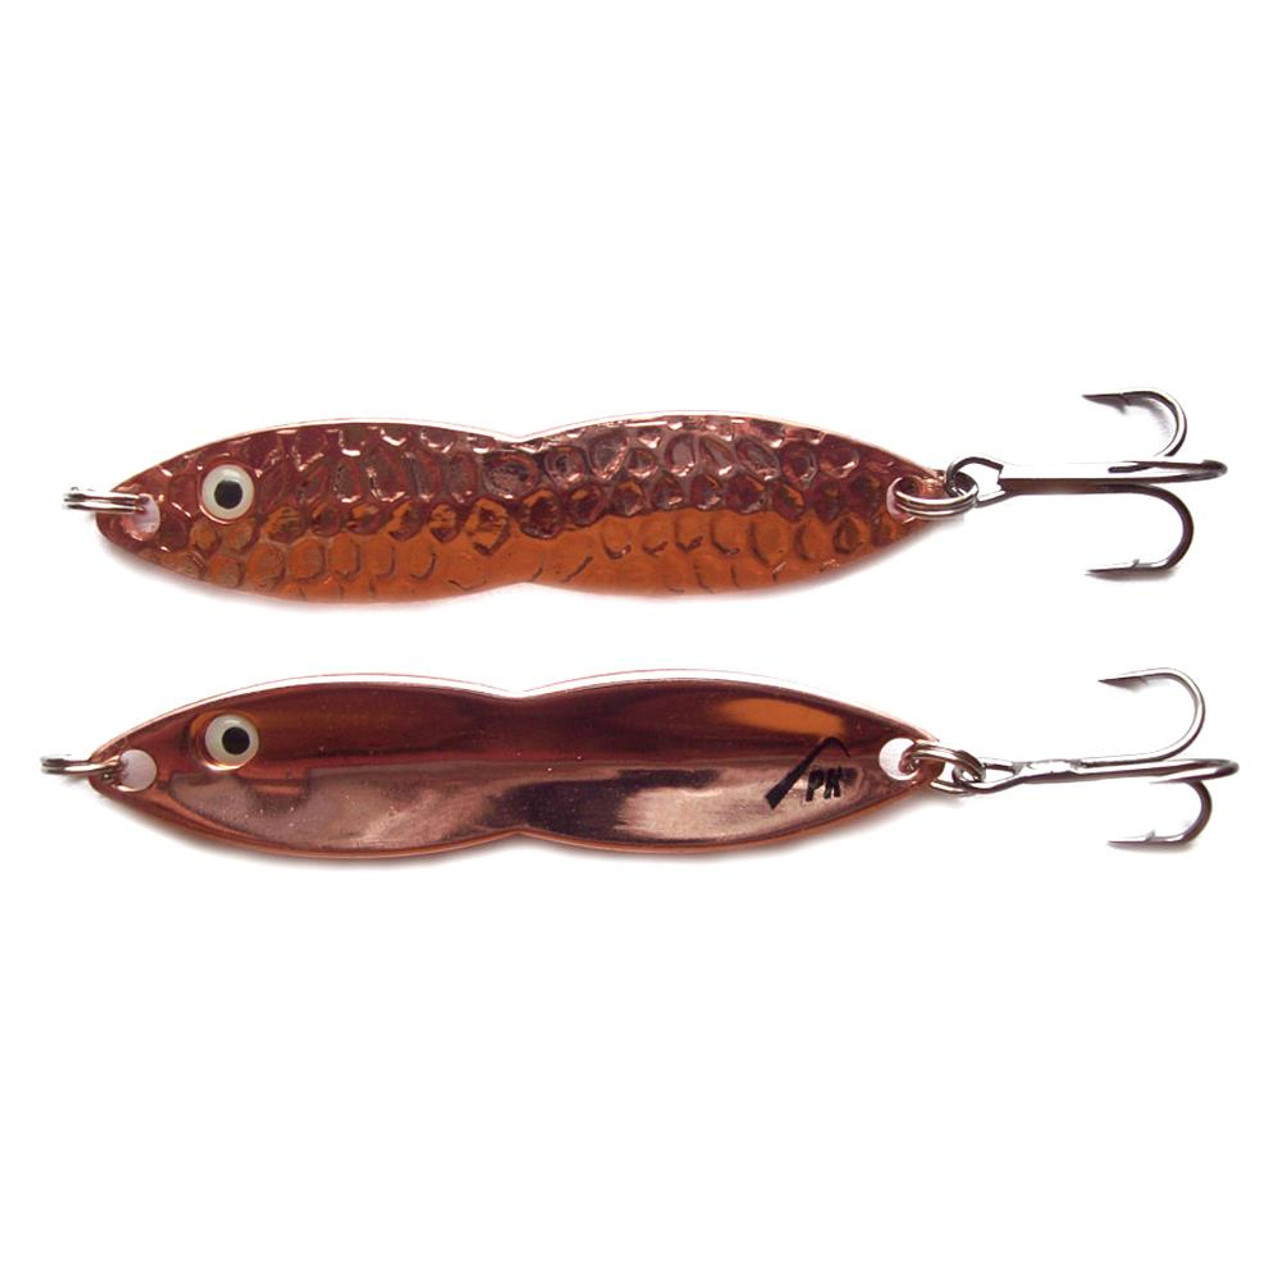 Do You Know How to Fish Flutter Spoons? - Wired2Fish